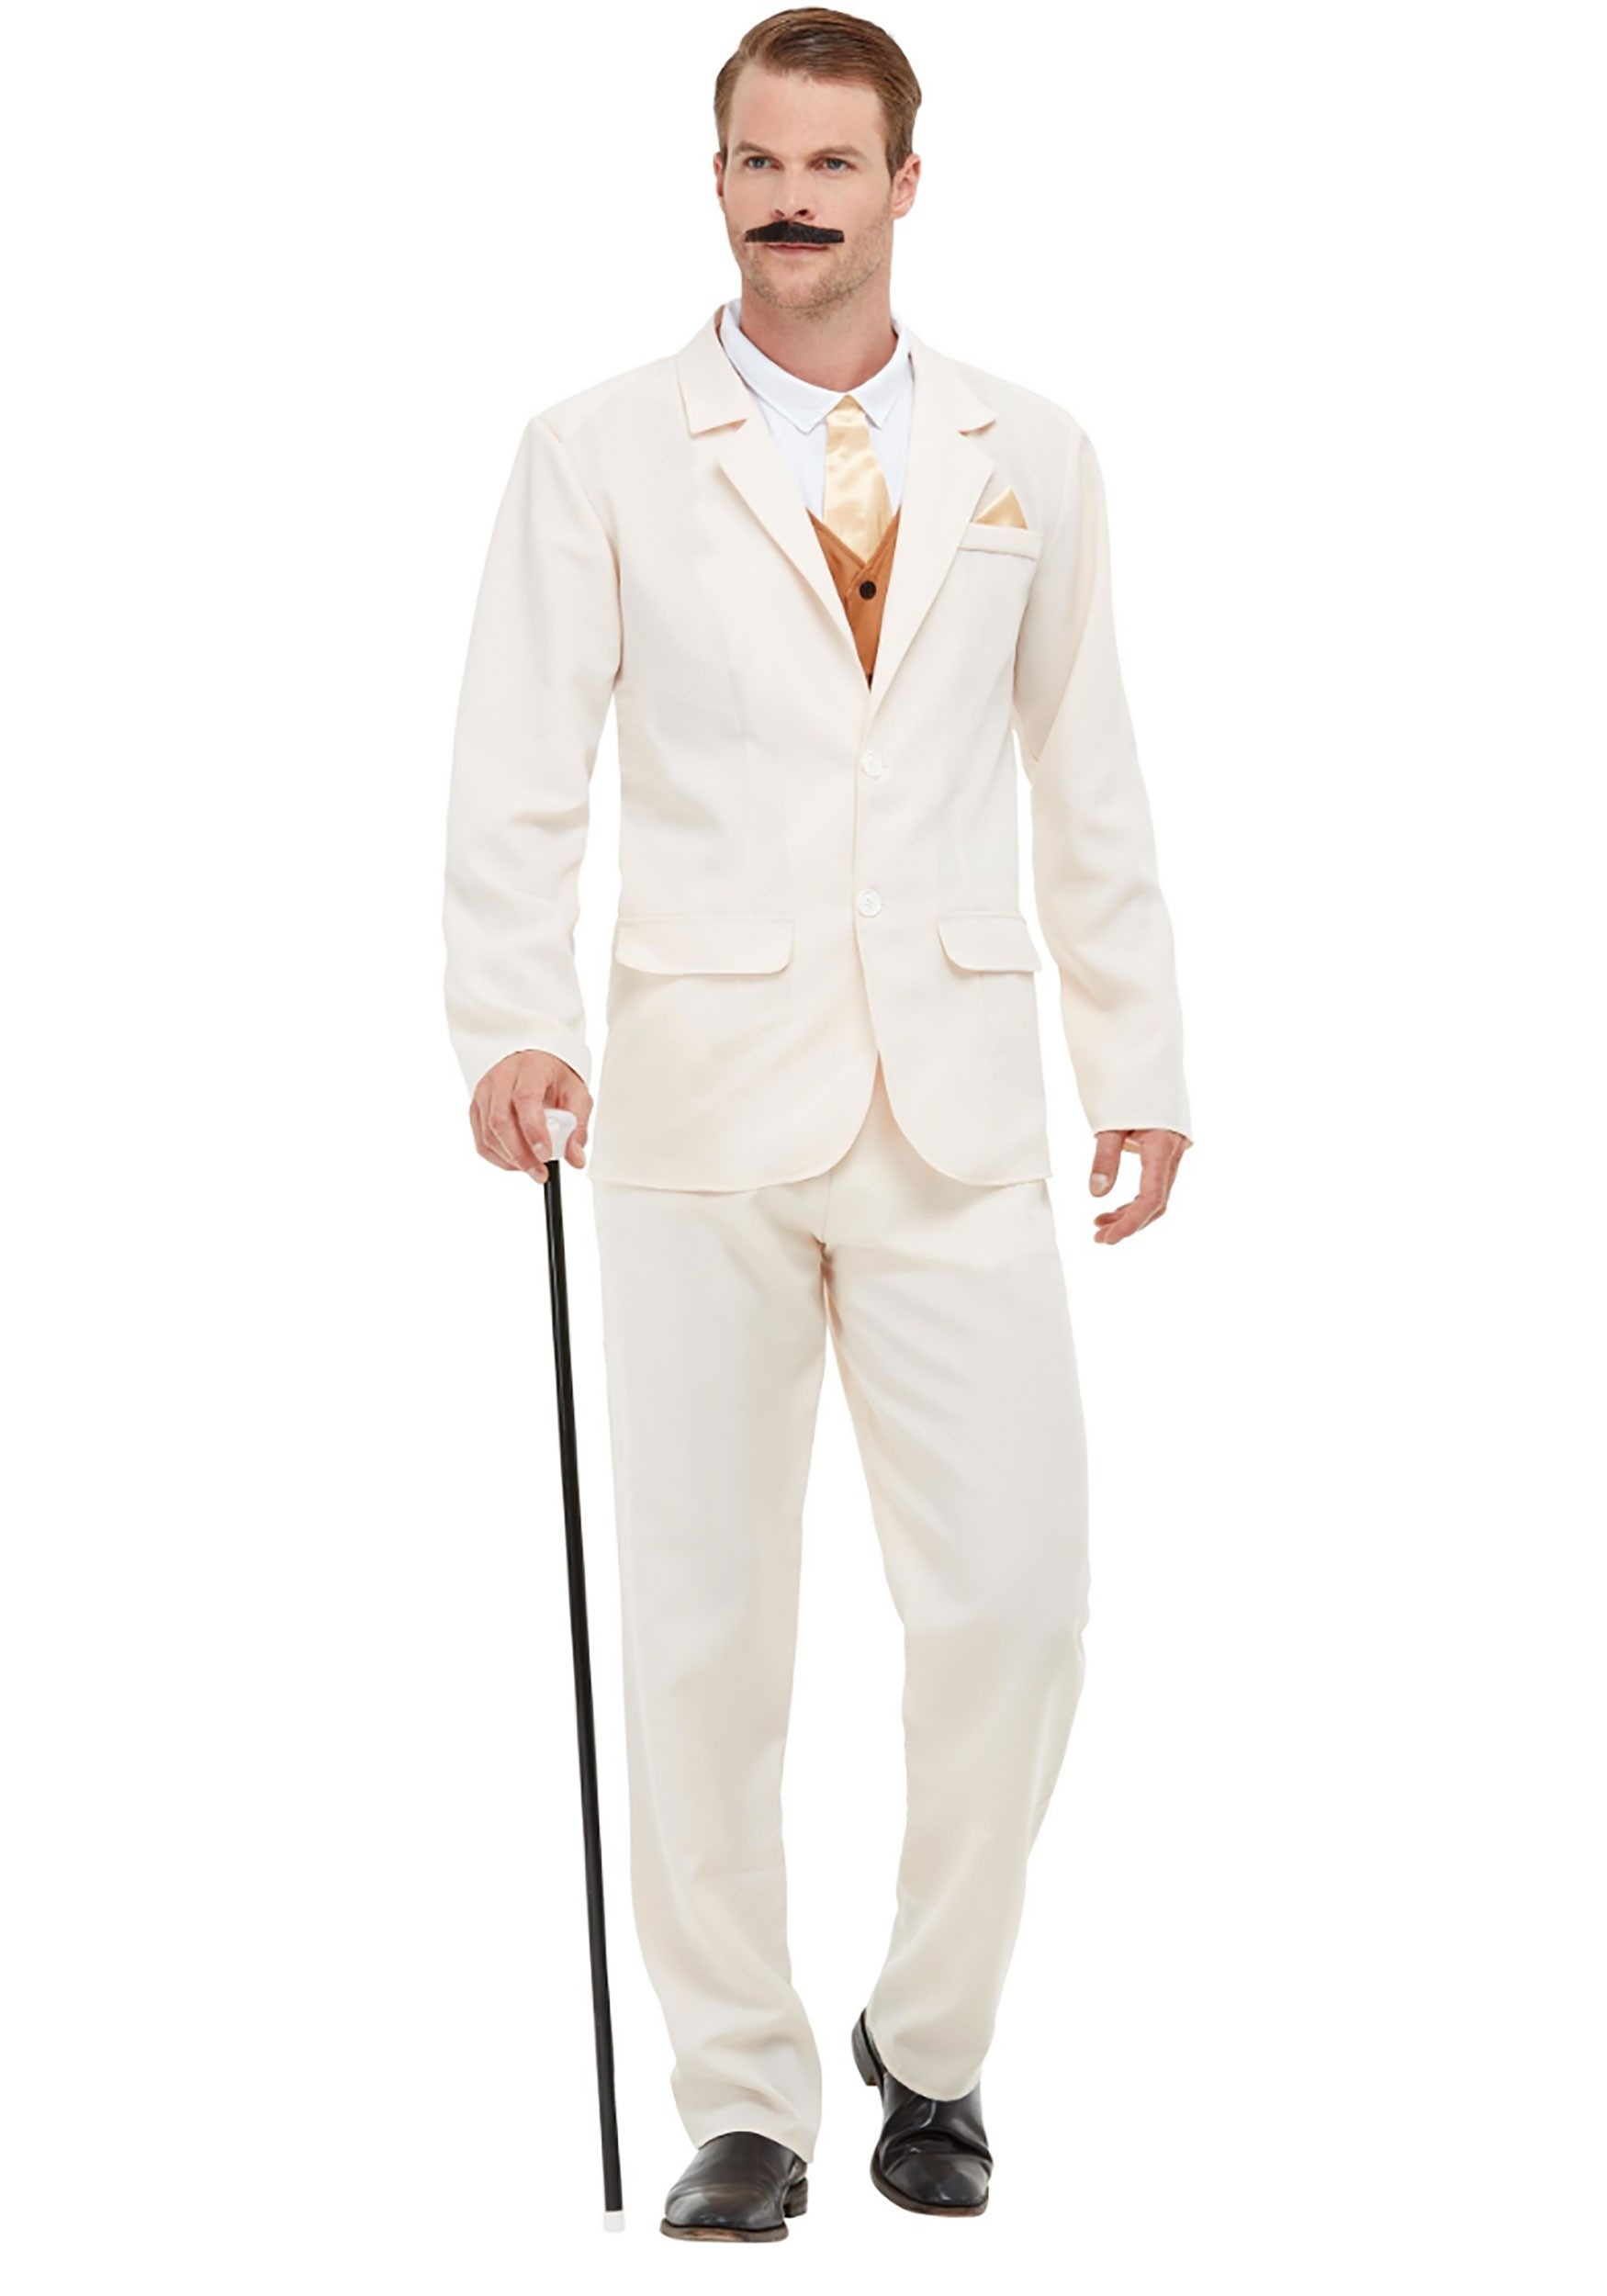 Image of Adult Roaring 20s White Suit Costume ID SM50724-XL